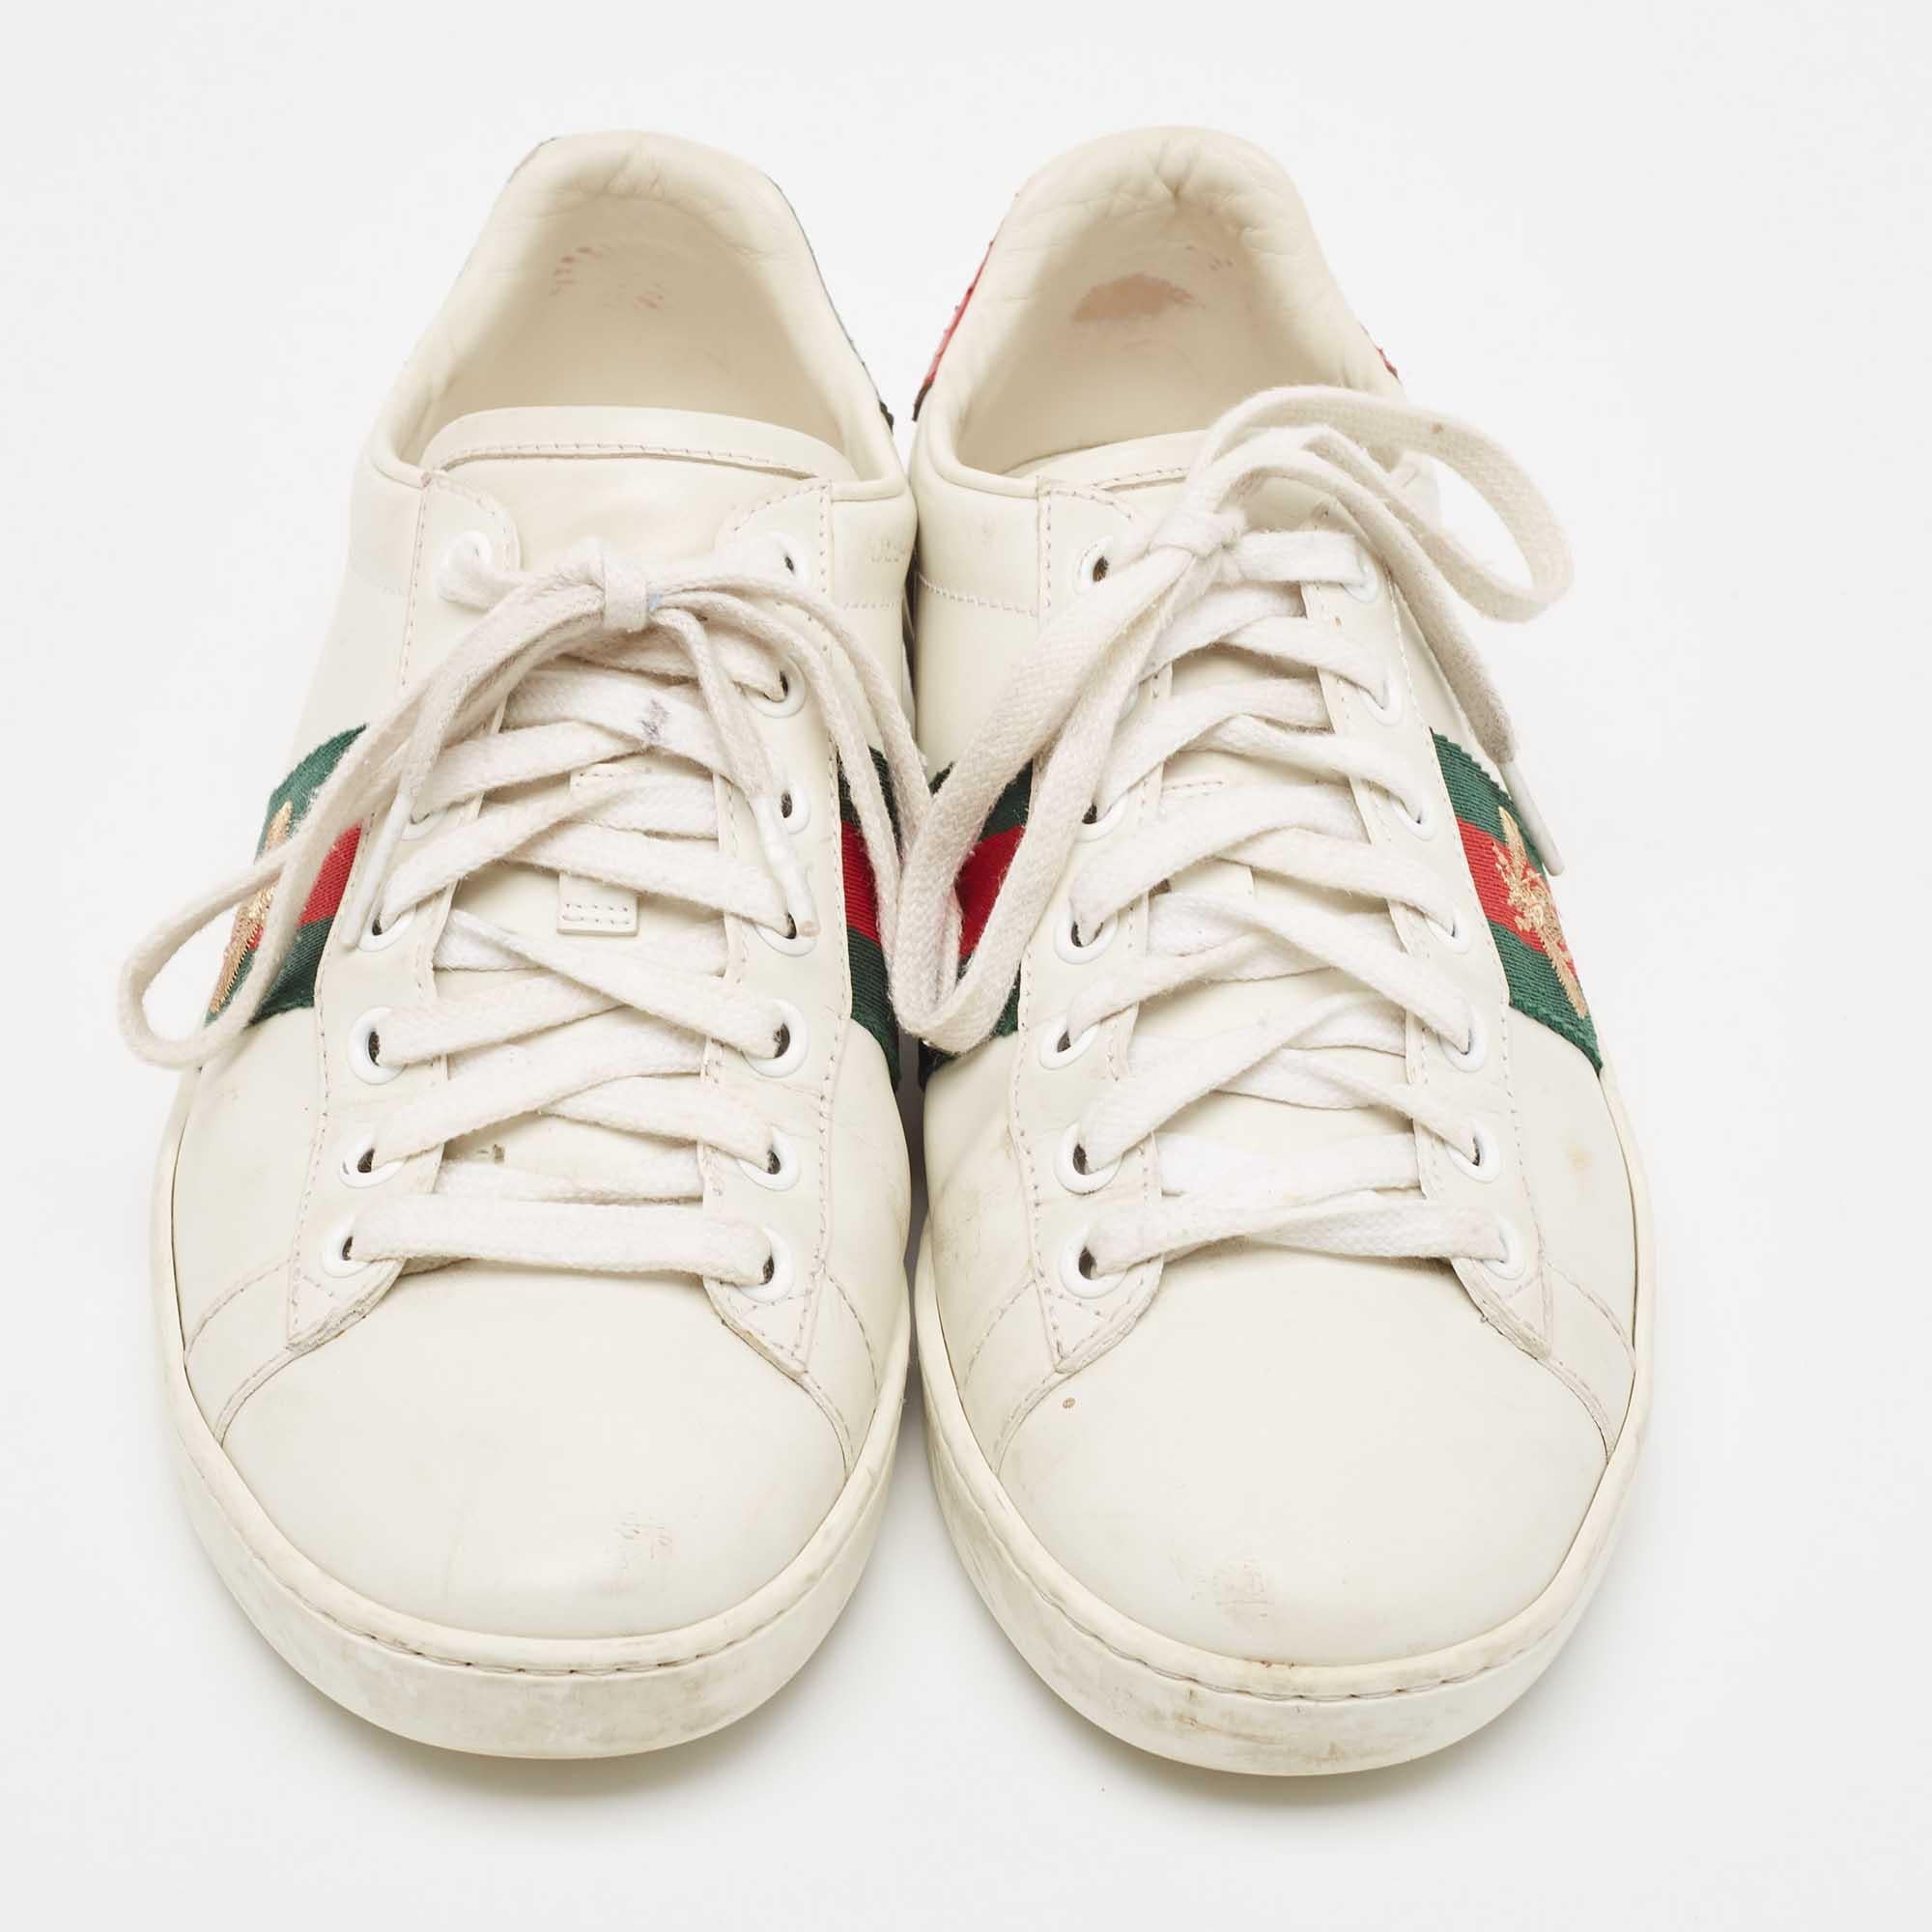 Gucci White Leather Embroidered Bee Ace Sneakers Size 36 In Fair Condition For Sale In Dubai, Al Qouz 2